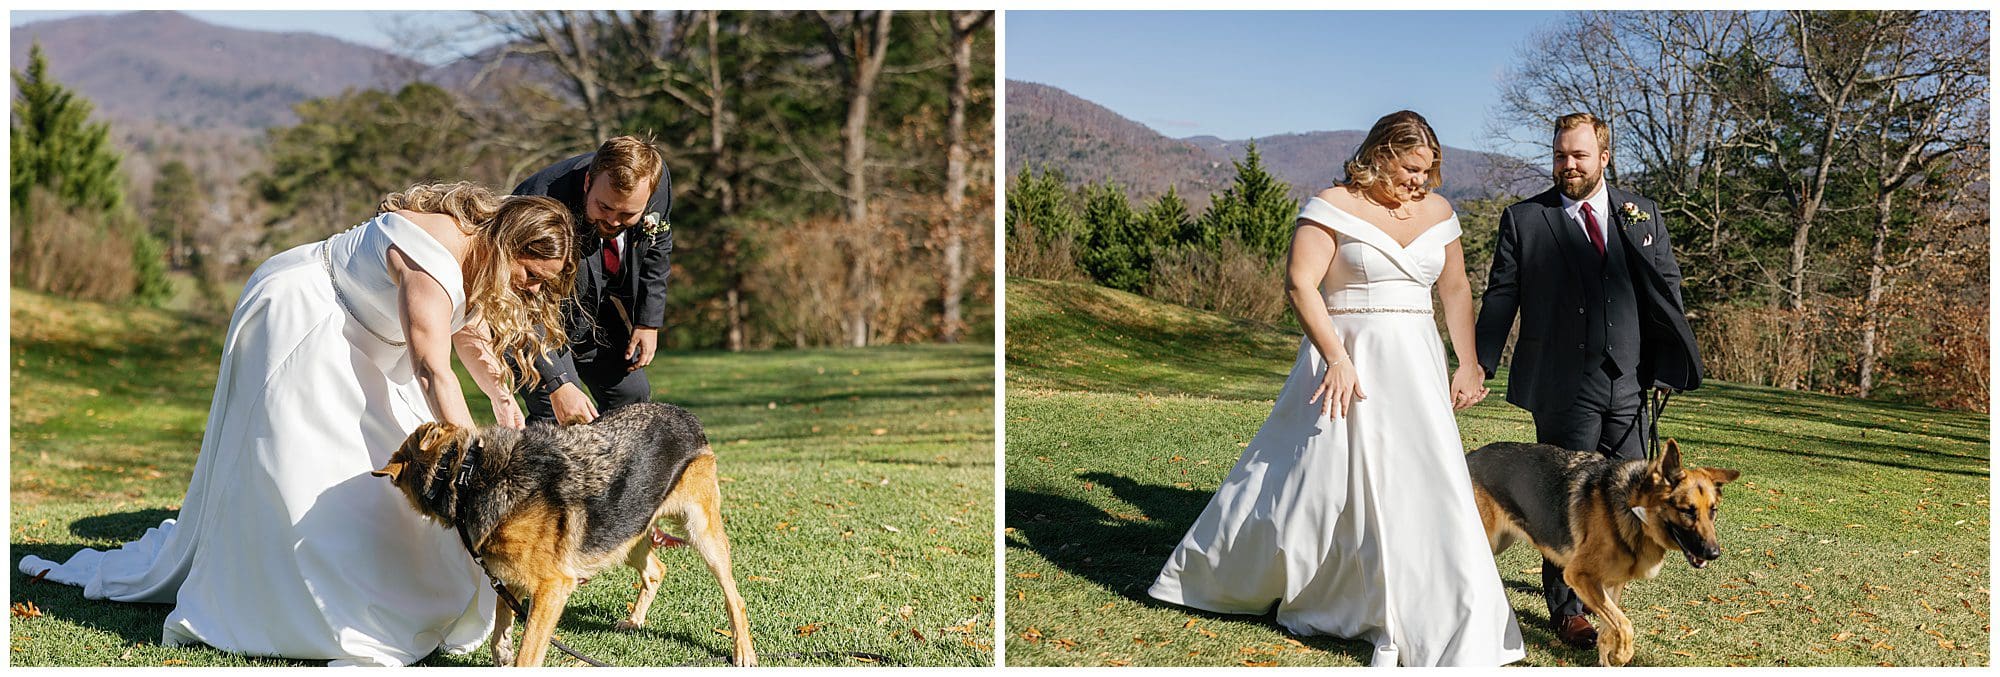 Two pictures of a bride and groom with a dog.